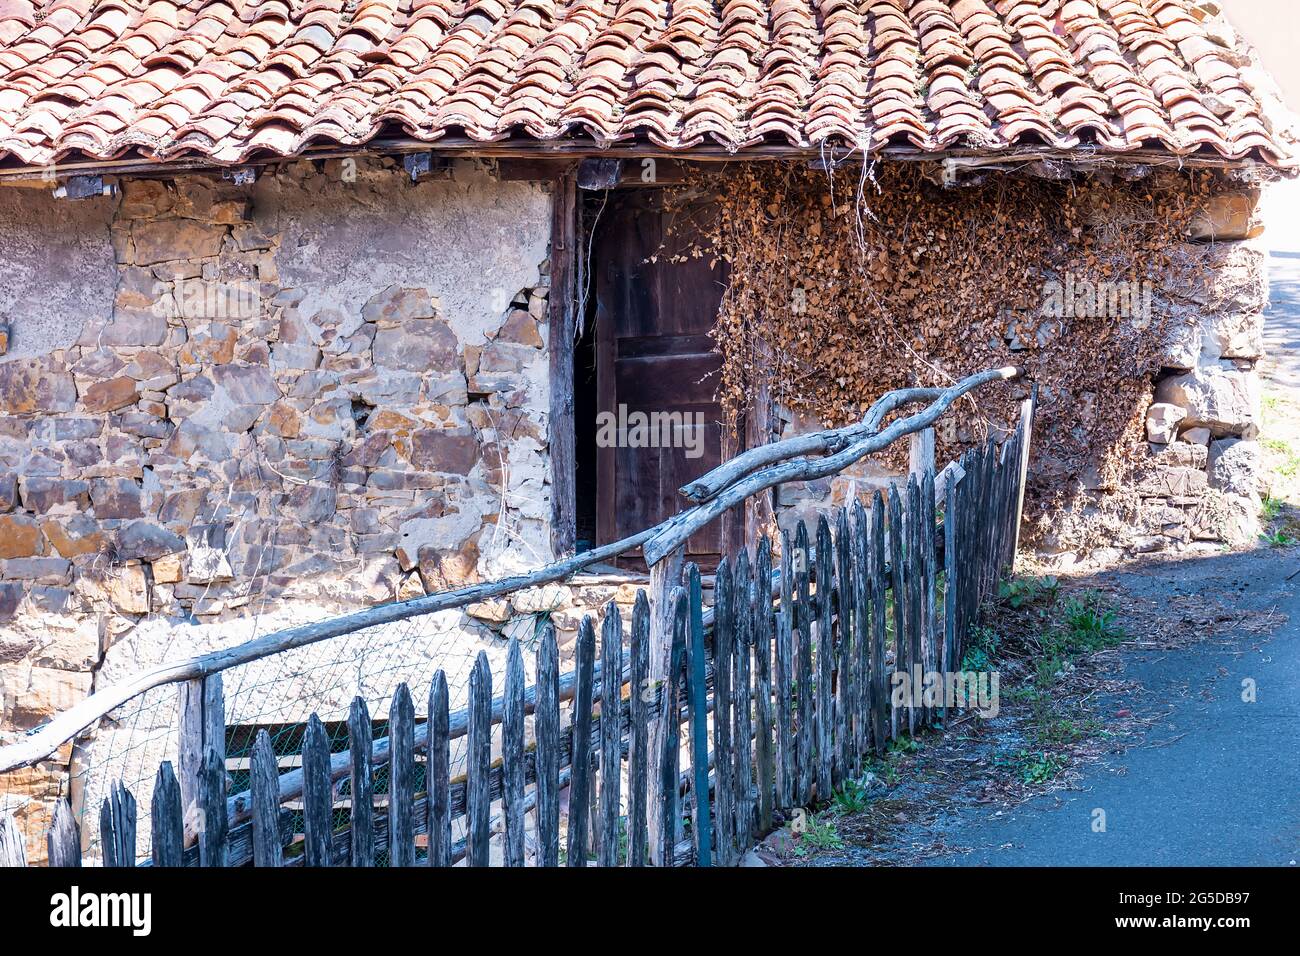 View of an apparently abandoned old house in a village in Asturias, Spain.Photograph with a predominantly brownish tone and shot in horizontal format. Stock Photo